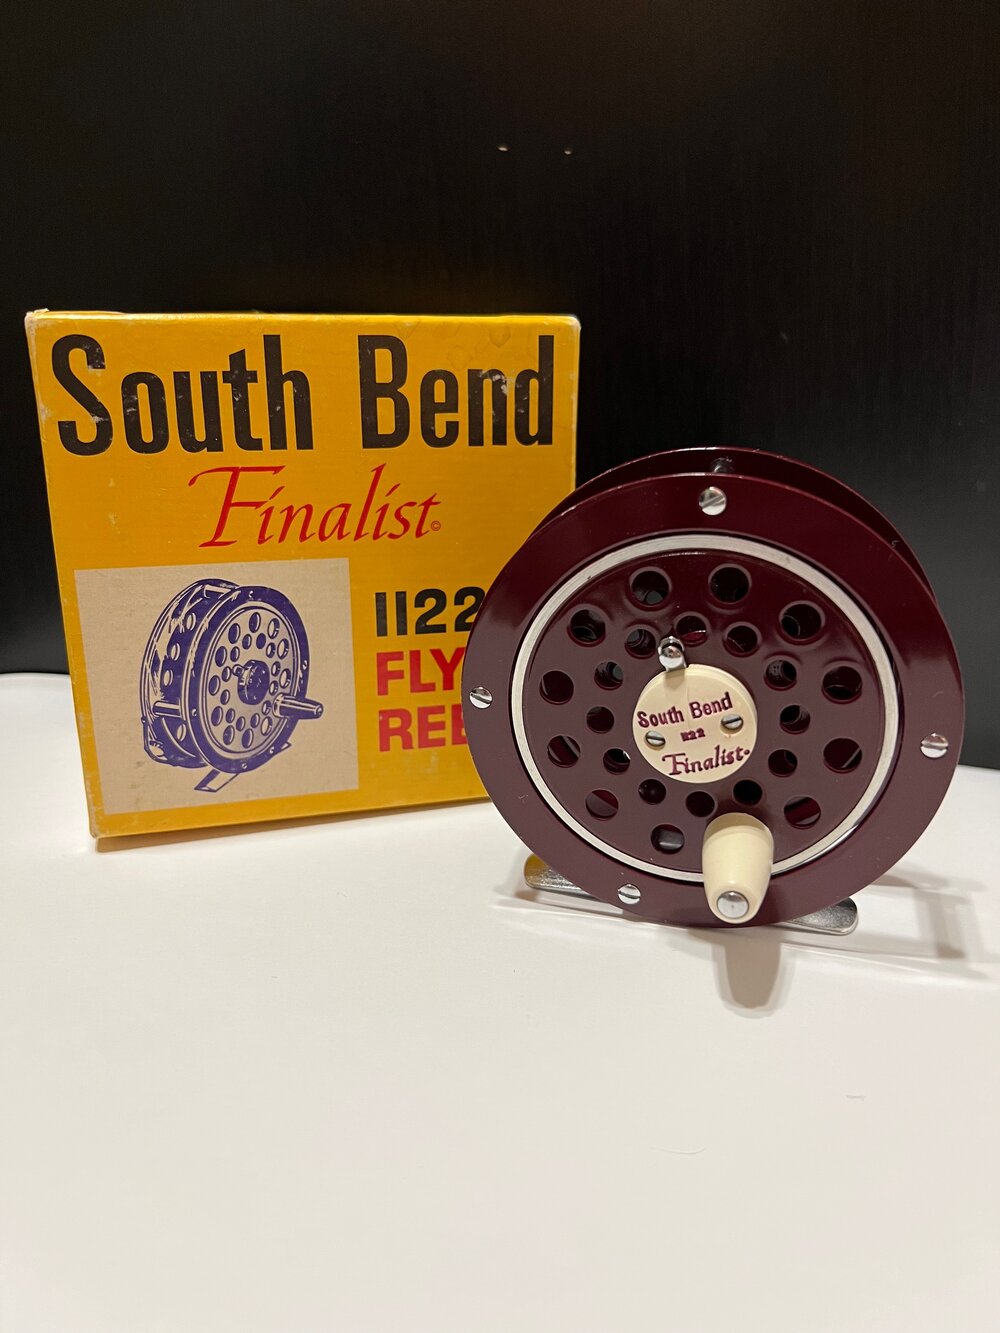 Sold At Auction: Lot Of Fly South Bend Finalist, Pflueger , 48% OFF